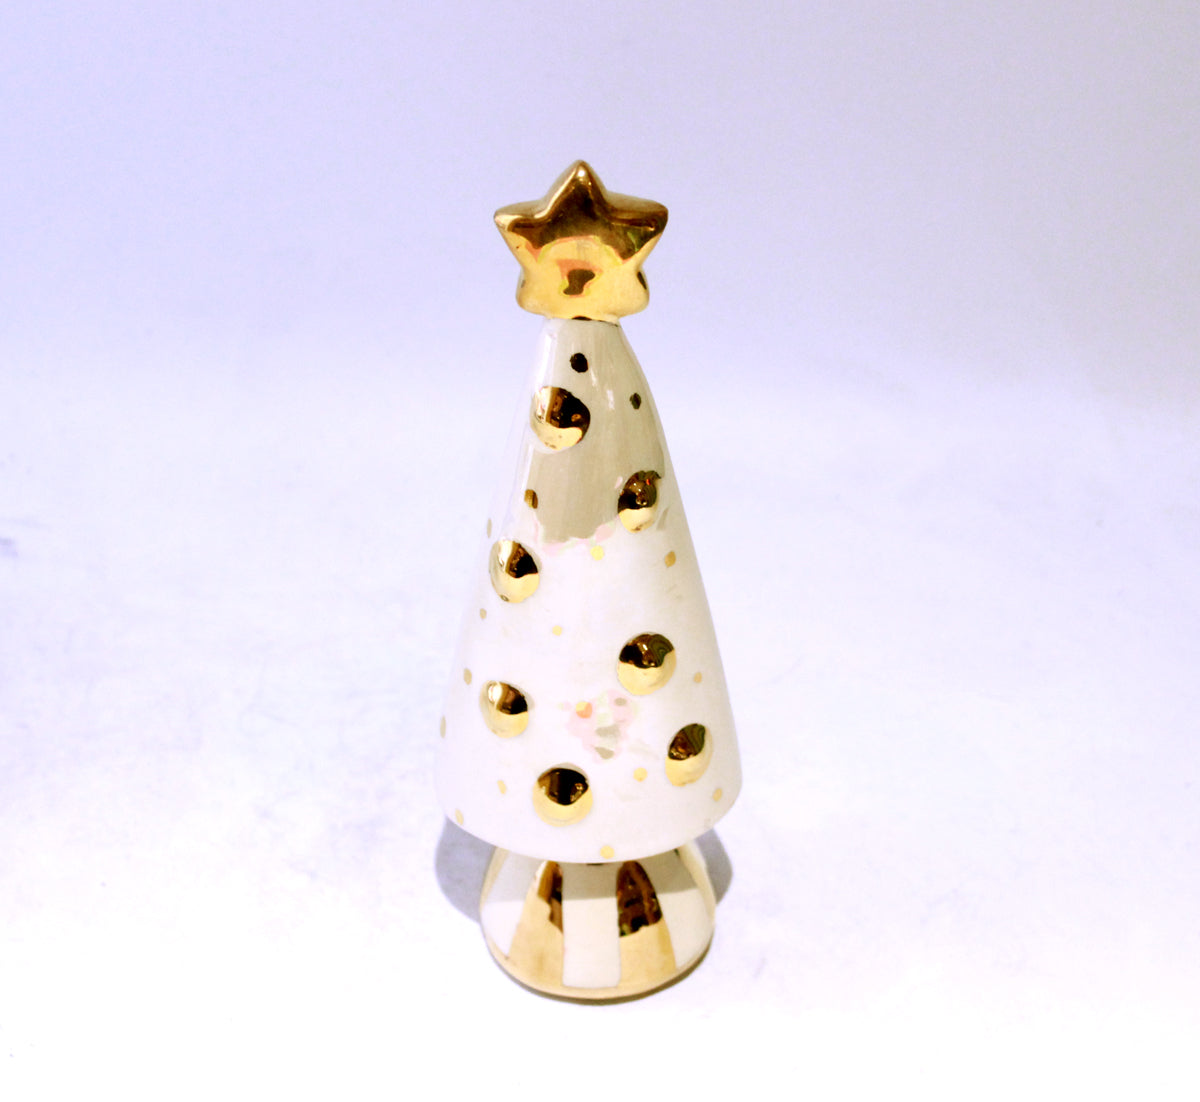 Small Christmas Tree in Iridescent White with Gold Striped Base